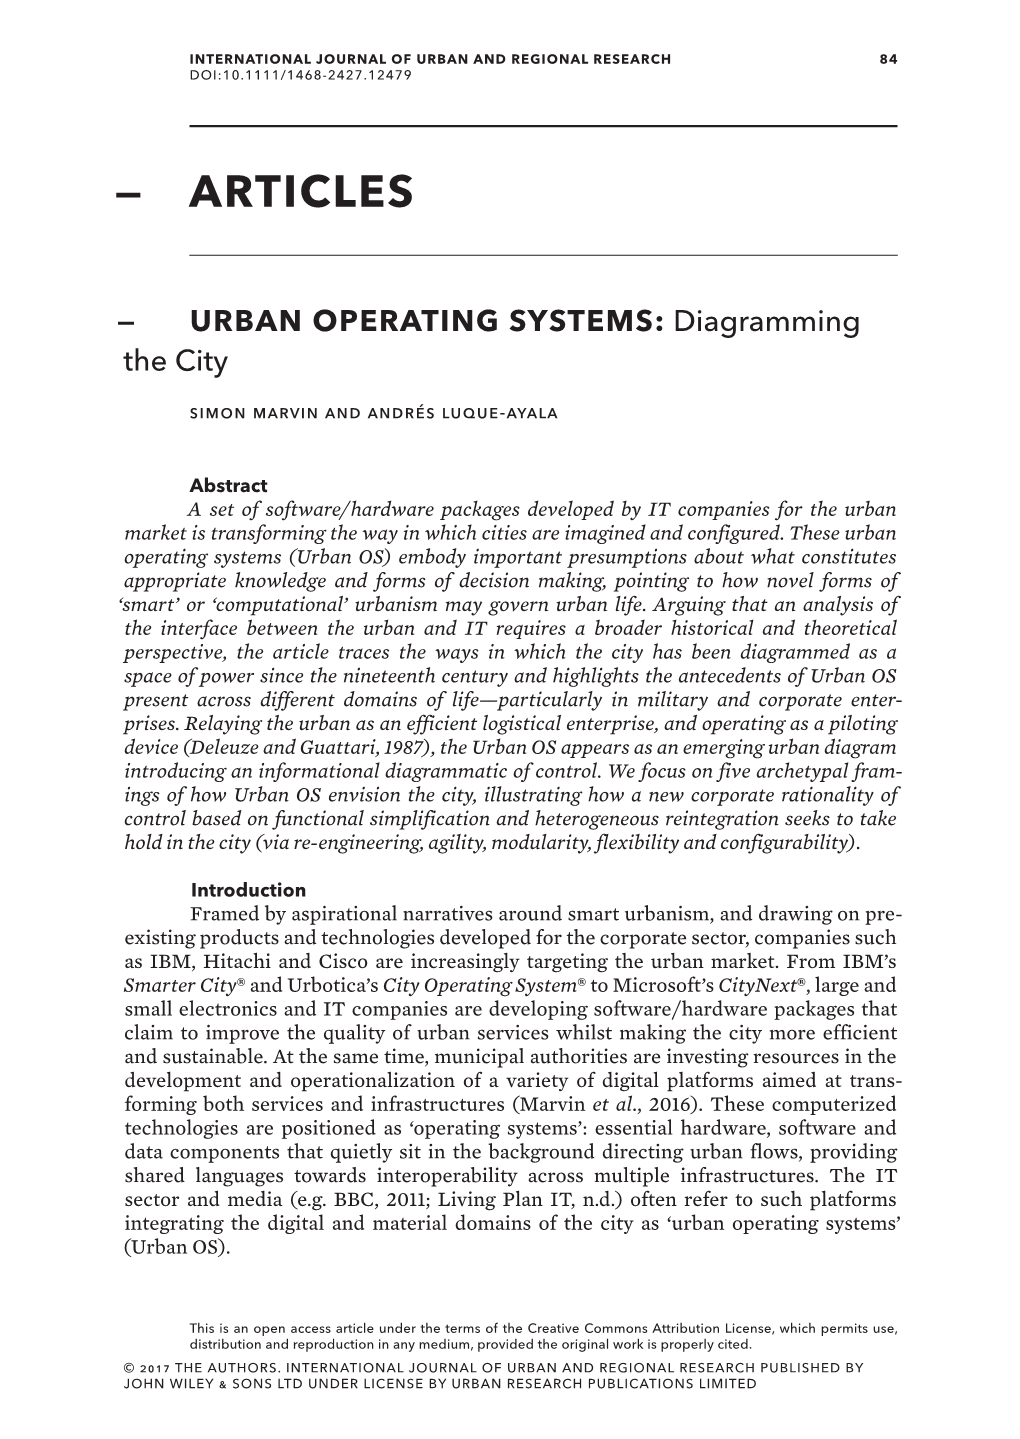 Urban Operating Systems: Diagramming the City